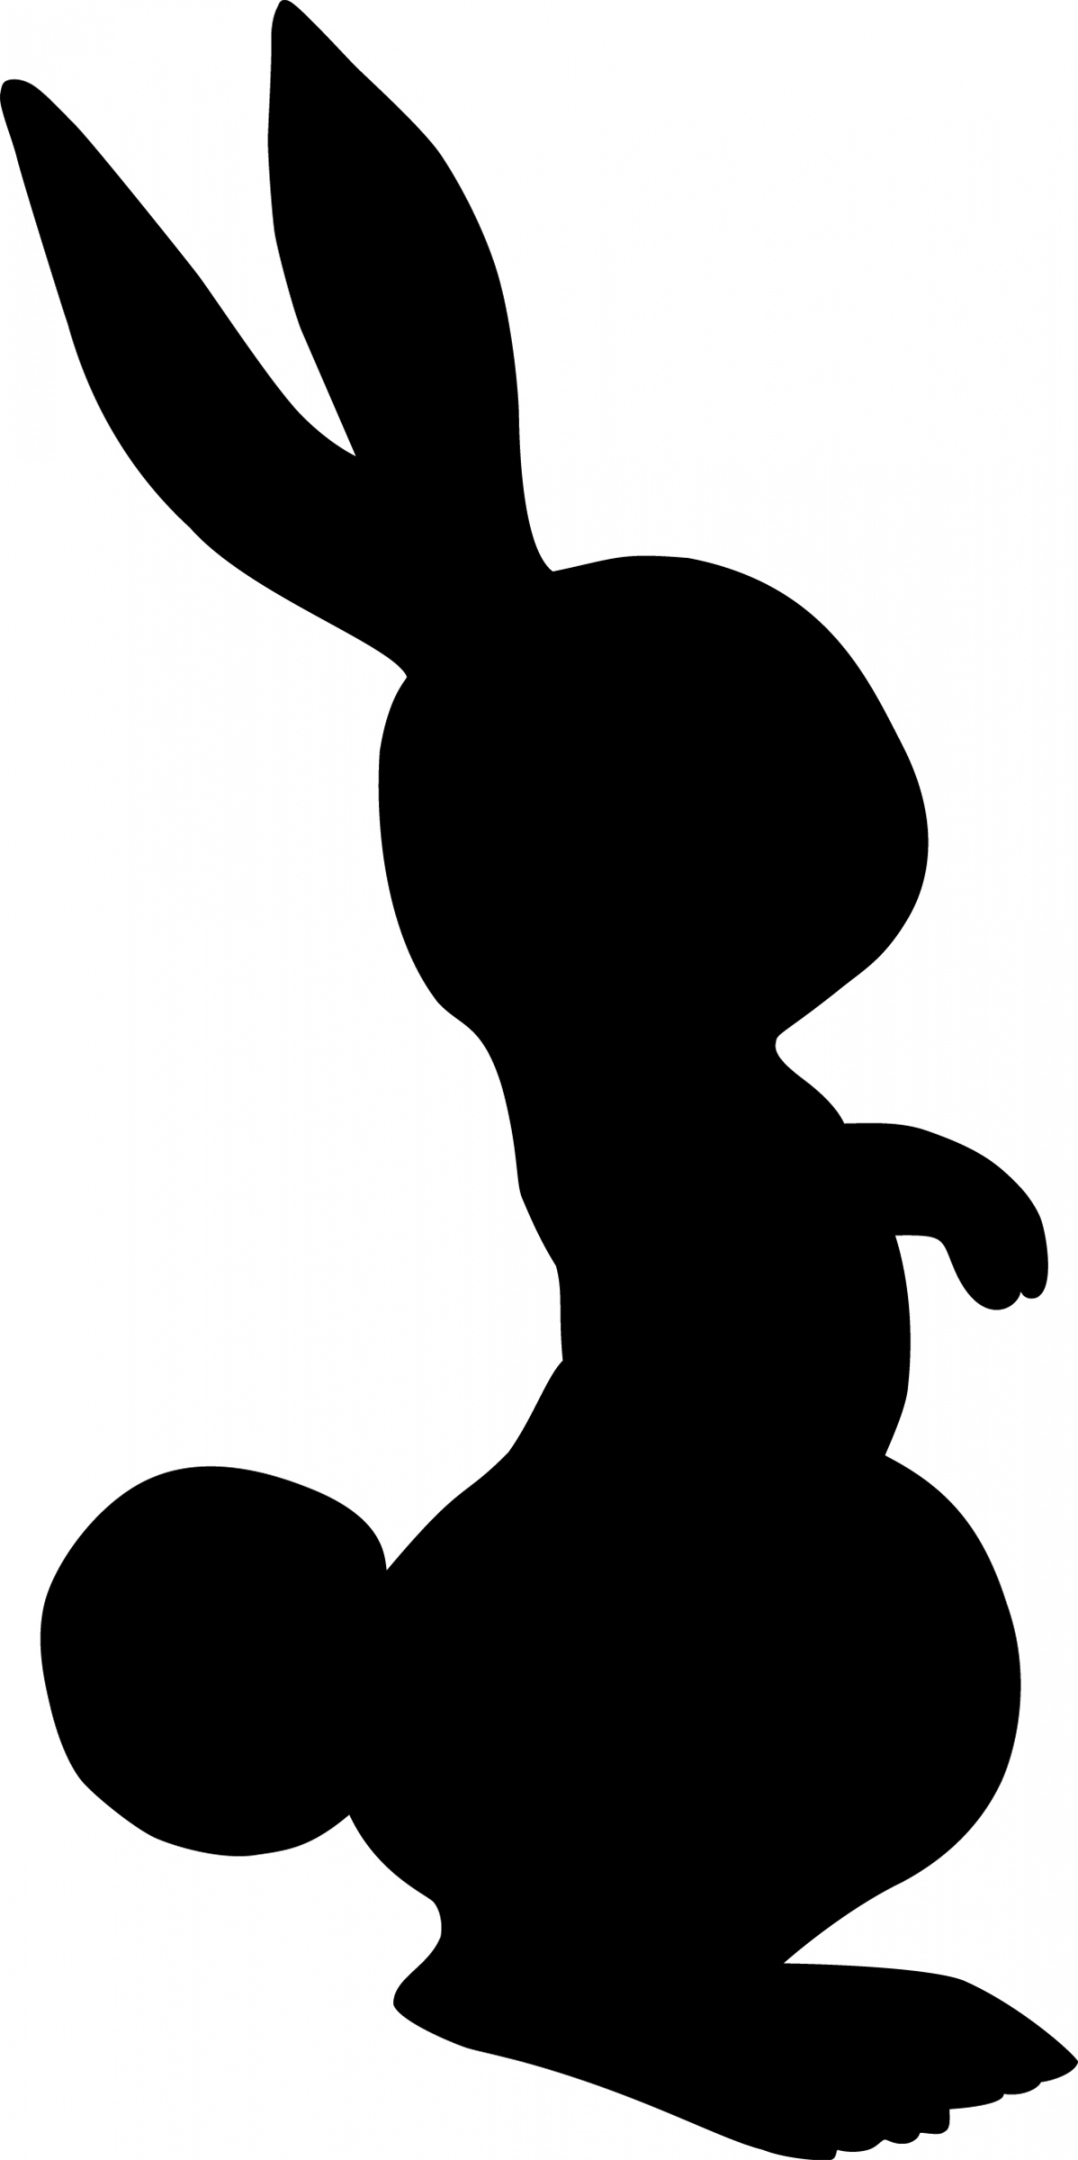 Cute Bunny Rabbit Silhouettes and Clipart! - The Graphics Fairy - FREE Printables - Bunny Silhouette Printable